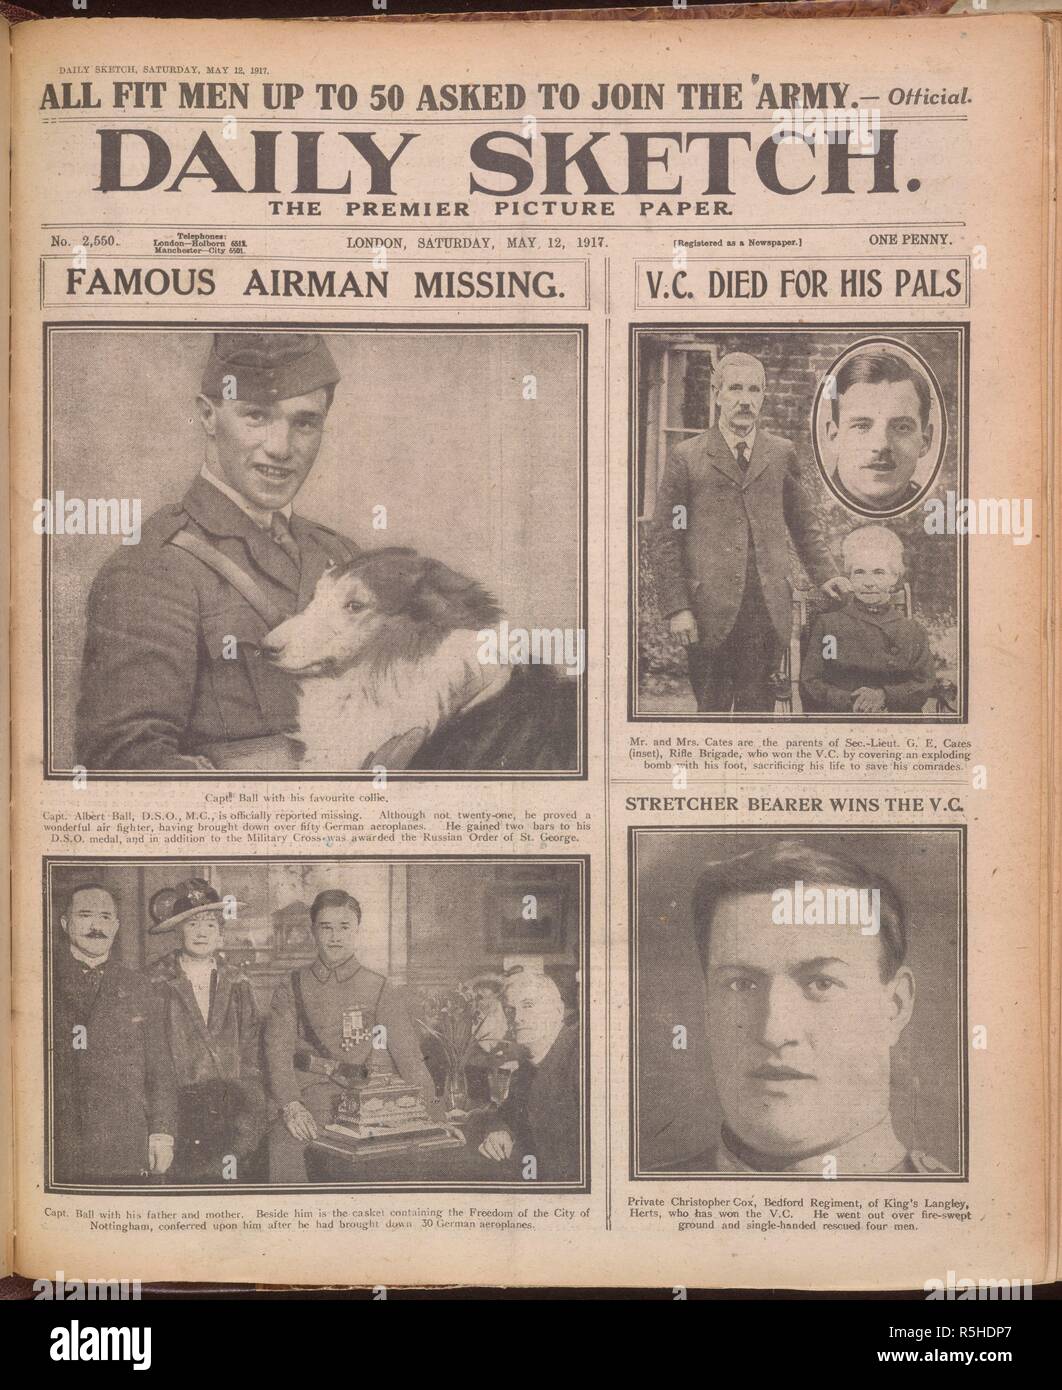 Four photographs : Captain Albert Ball, D.S.O, M.C., officially reported missing. Second Lieutenant G.E. Bates, V.C., killed saving his comrades. Another picture of Captain Ball, with his parents. A stretcher bearer, Private Christopher Cox, won a V.C rescuing four men. Daily Sketch. London, 1917. Source: Daily Sketch, Saturday, May 12, 1917 front page. Stock Photo